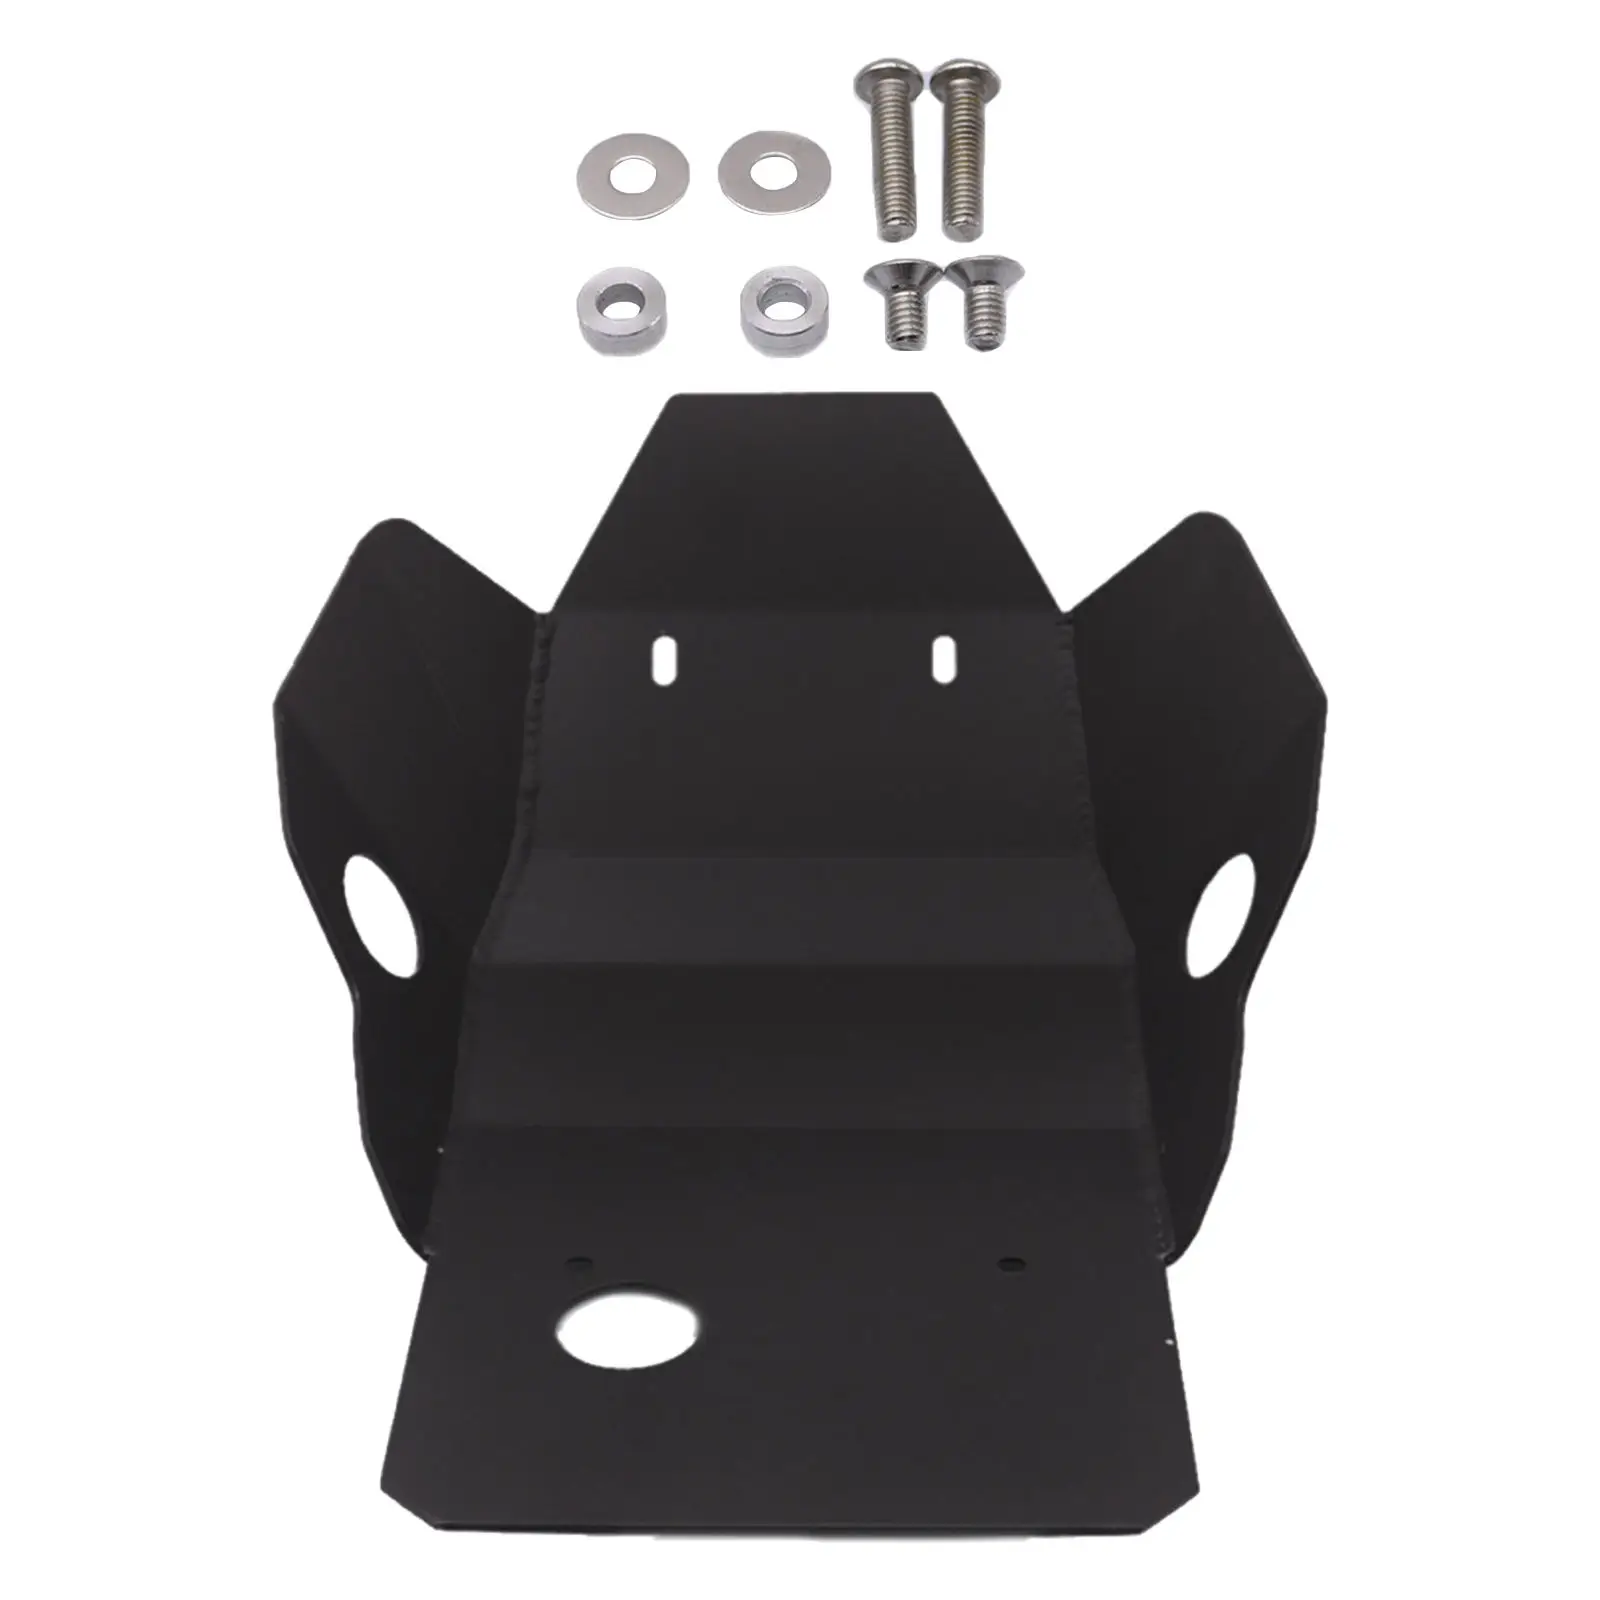 Engine Protector Guard Cover Bottom Skid Plate Shield with Ventilation Slots for Yamaha WR250R Replacement Acc